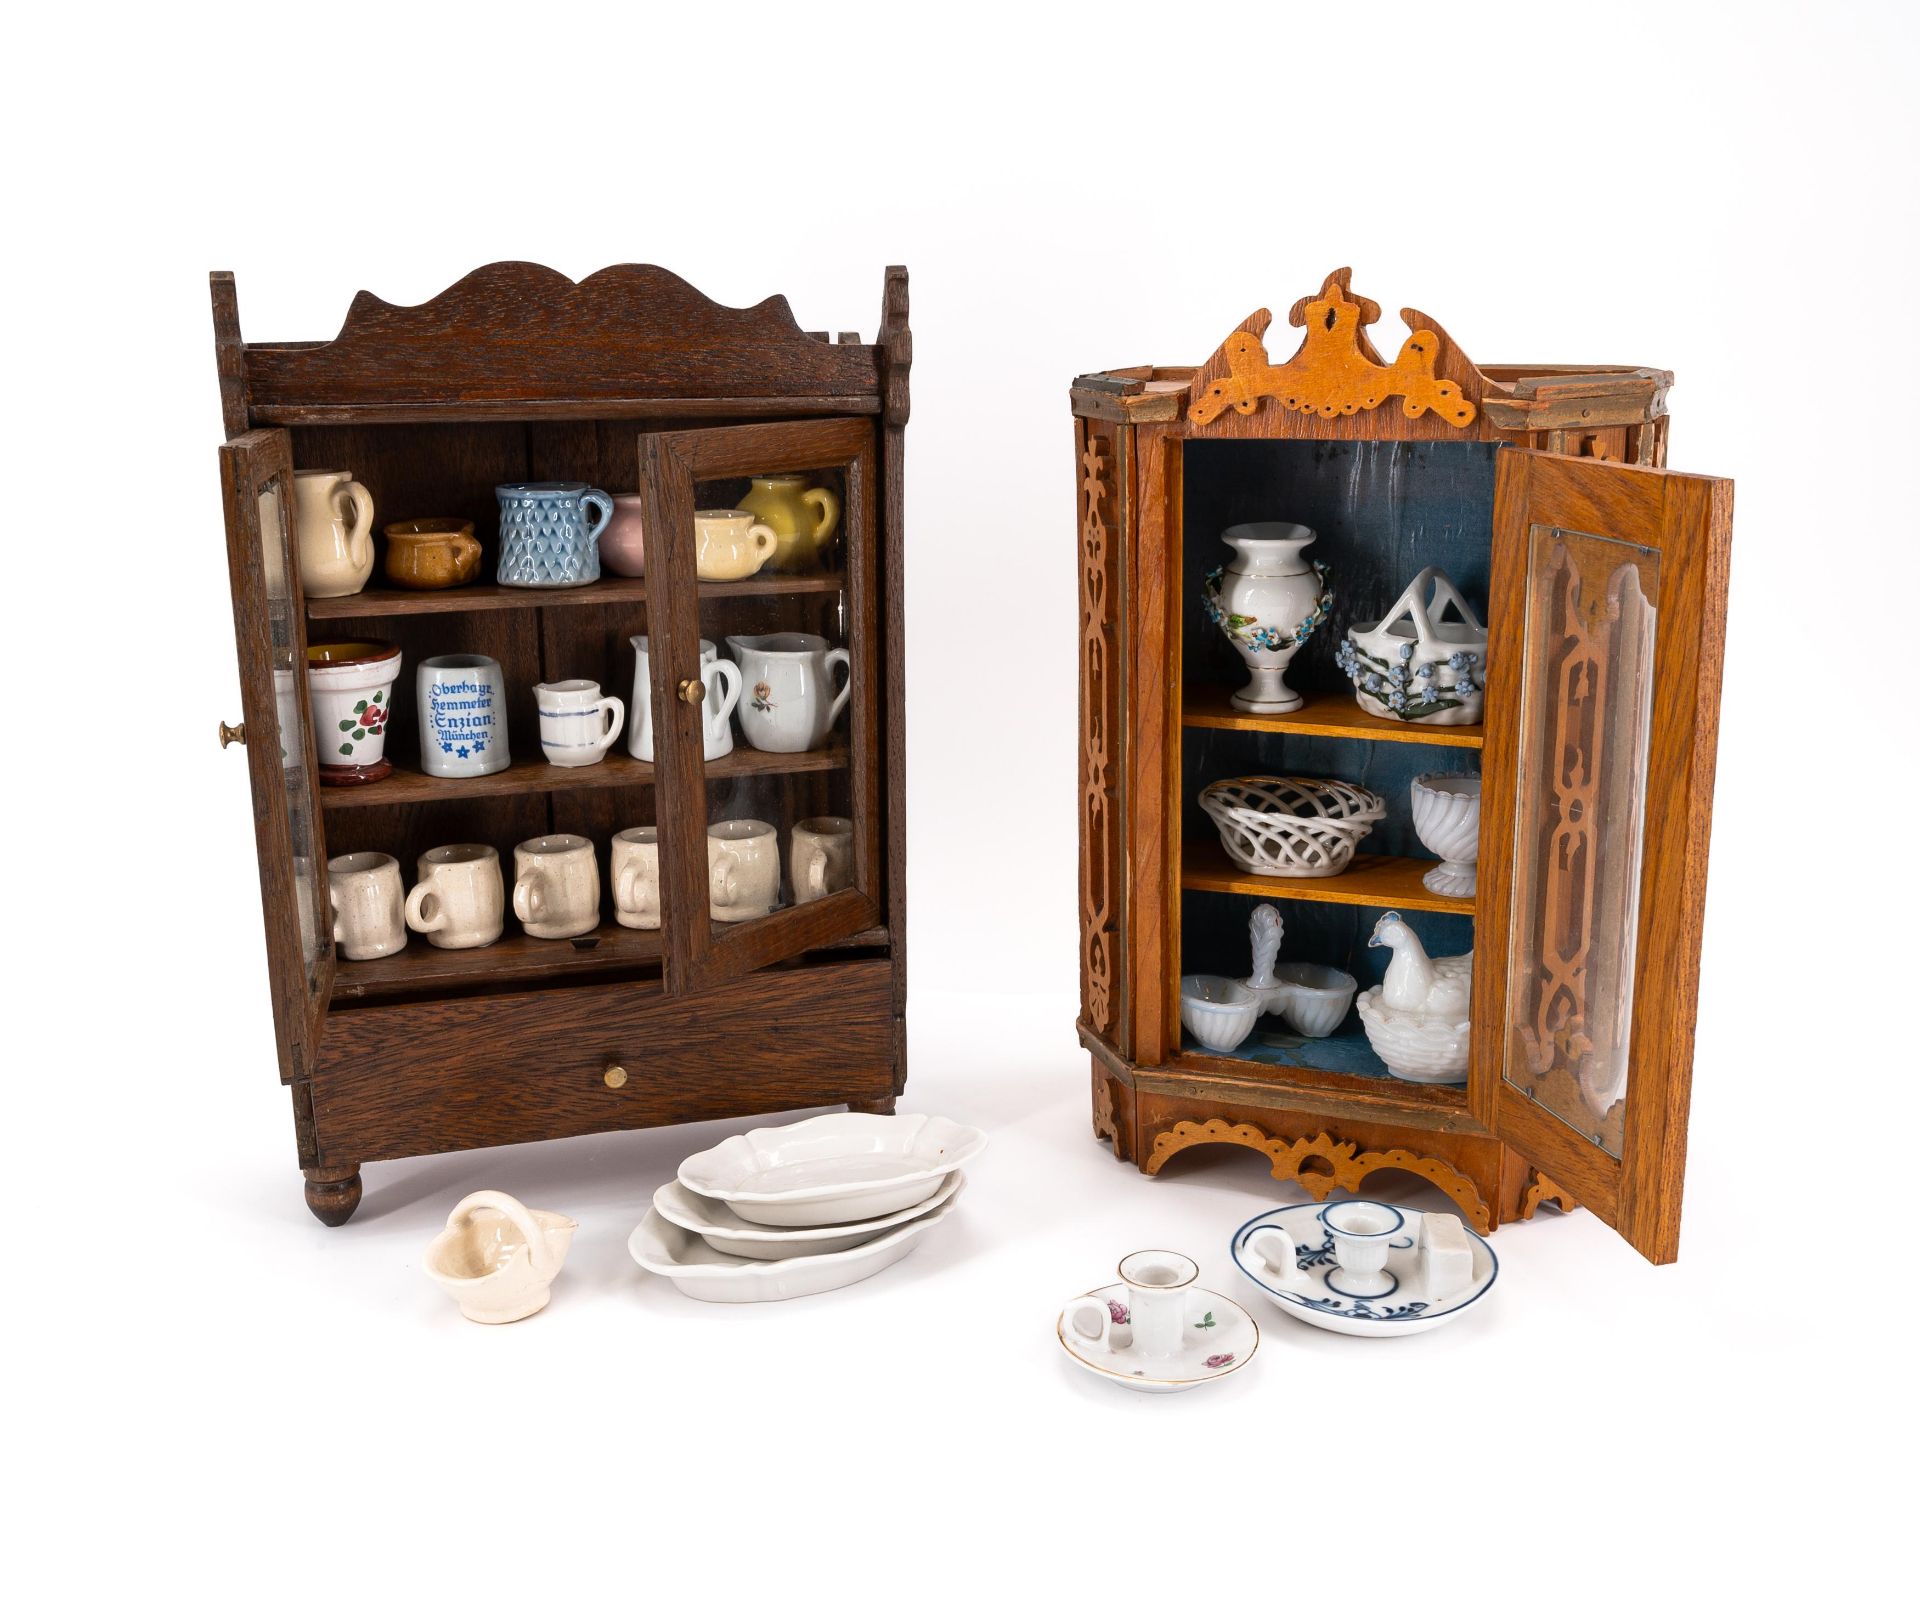 TWO MINIATURE CUPBOARDS WITH ALL KINDS OF TABLEWARE MADE OF WOOD, GLASS, METAL, RED CERAMIC AND PORC